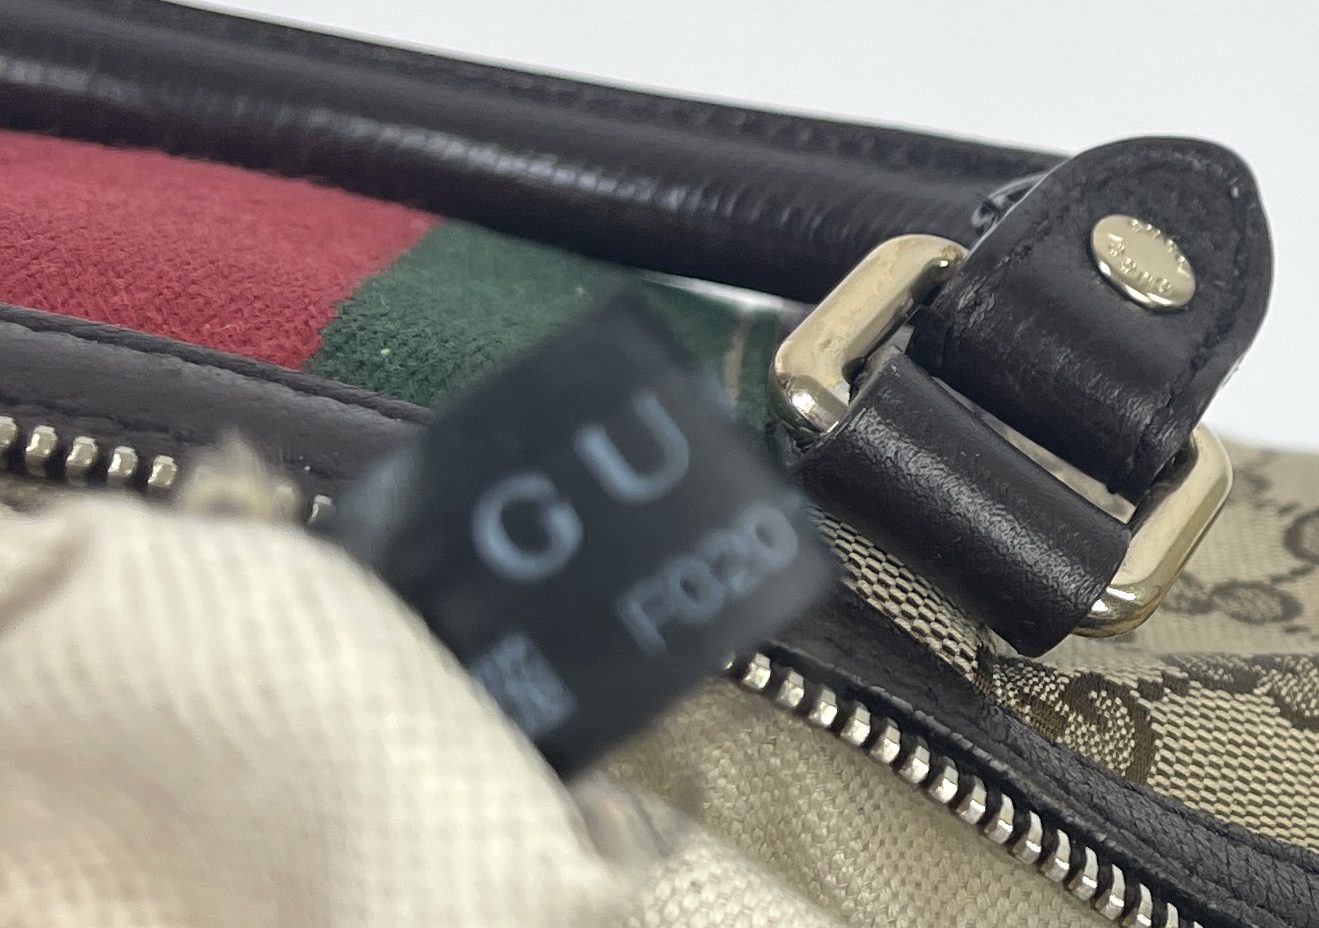 Gucci Bag Authentication: 8 Steps To Spot a Fake – Bagaholic